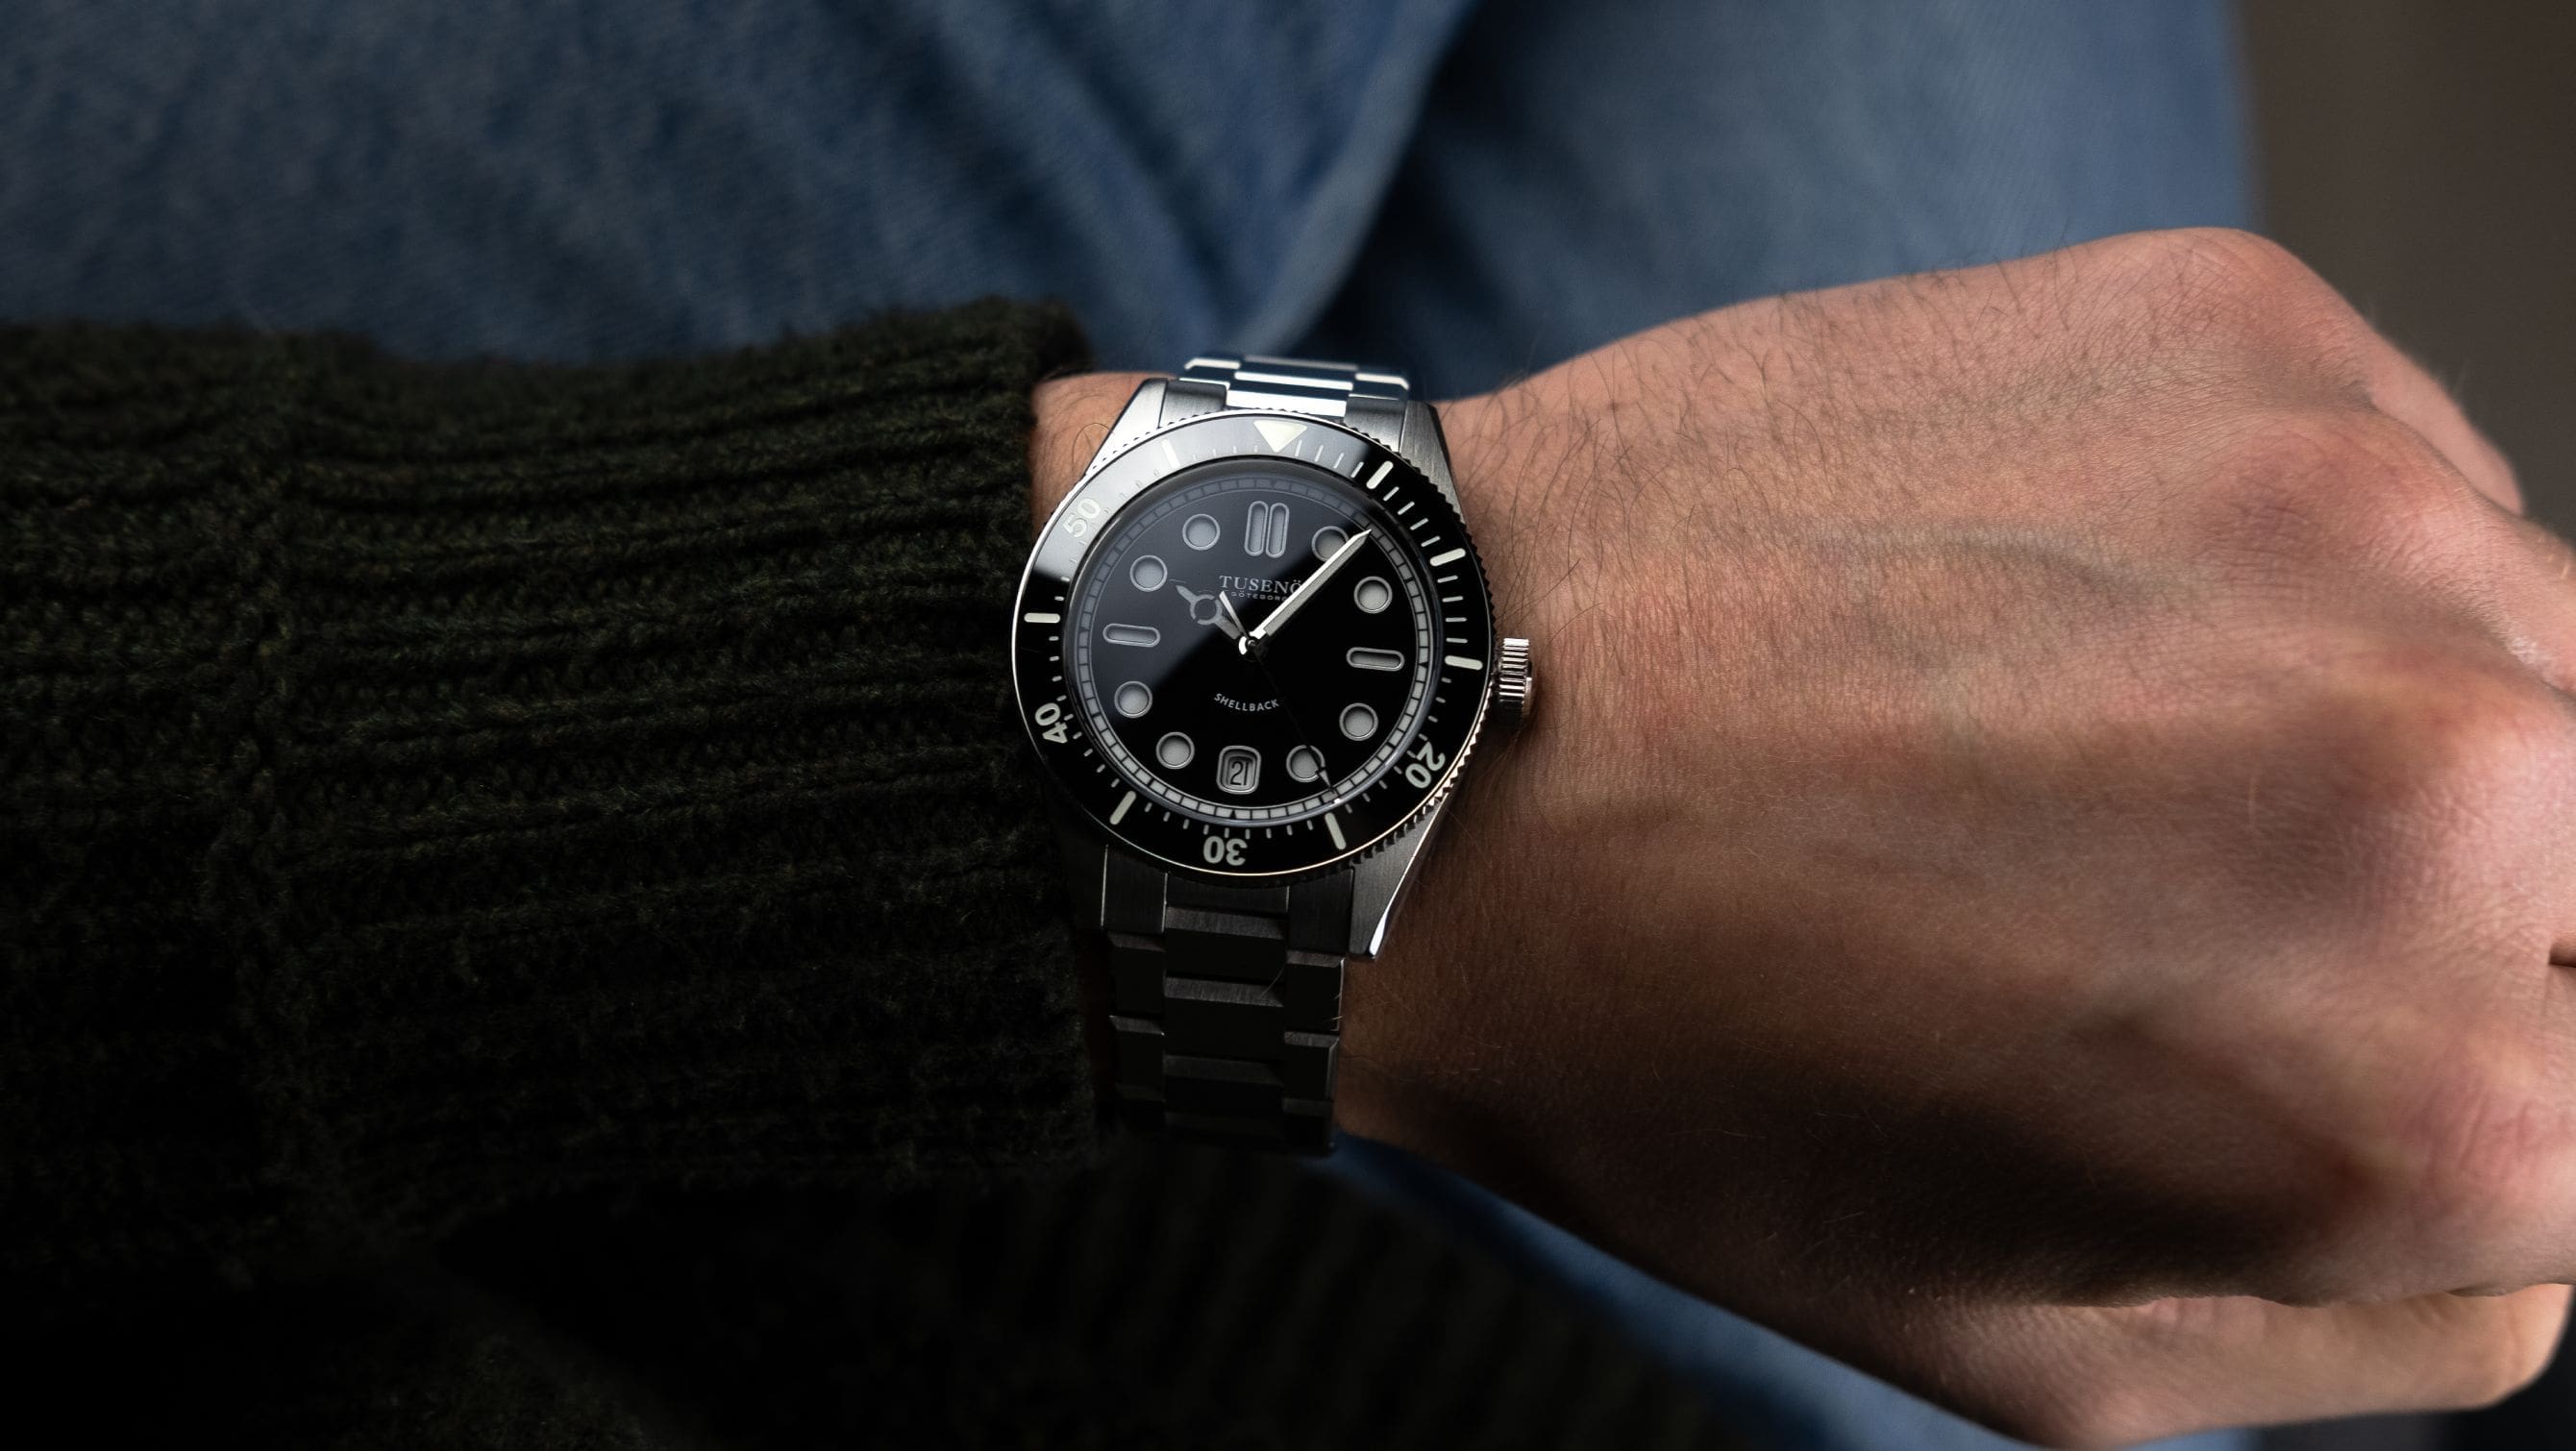 The Tusenö Shellback V2 is a stylish Swedish dive watch that’s a cut above most independent offerings